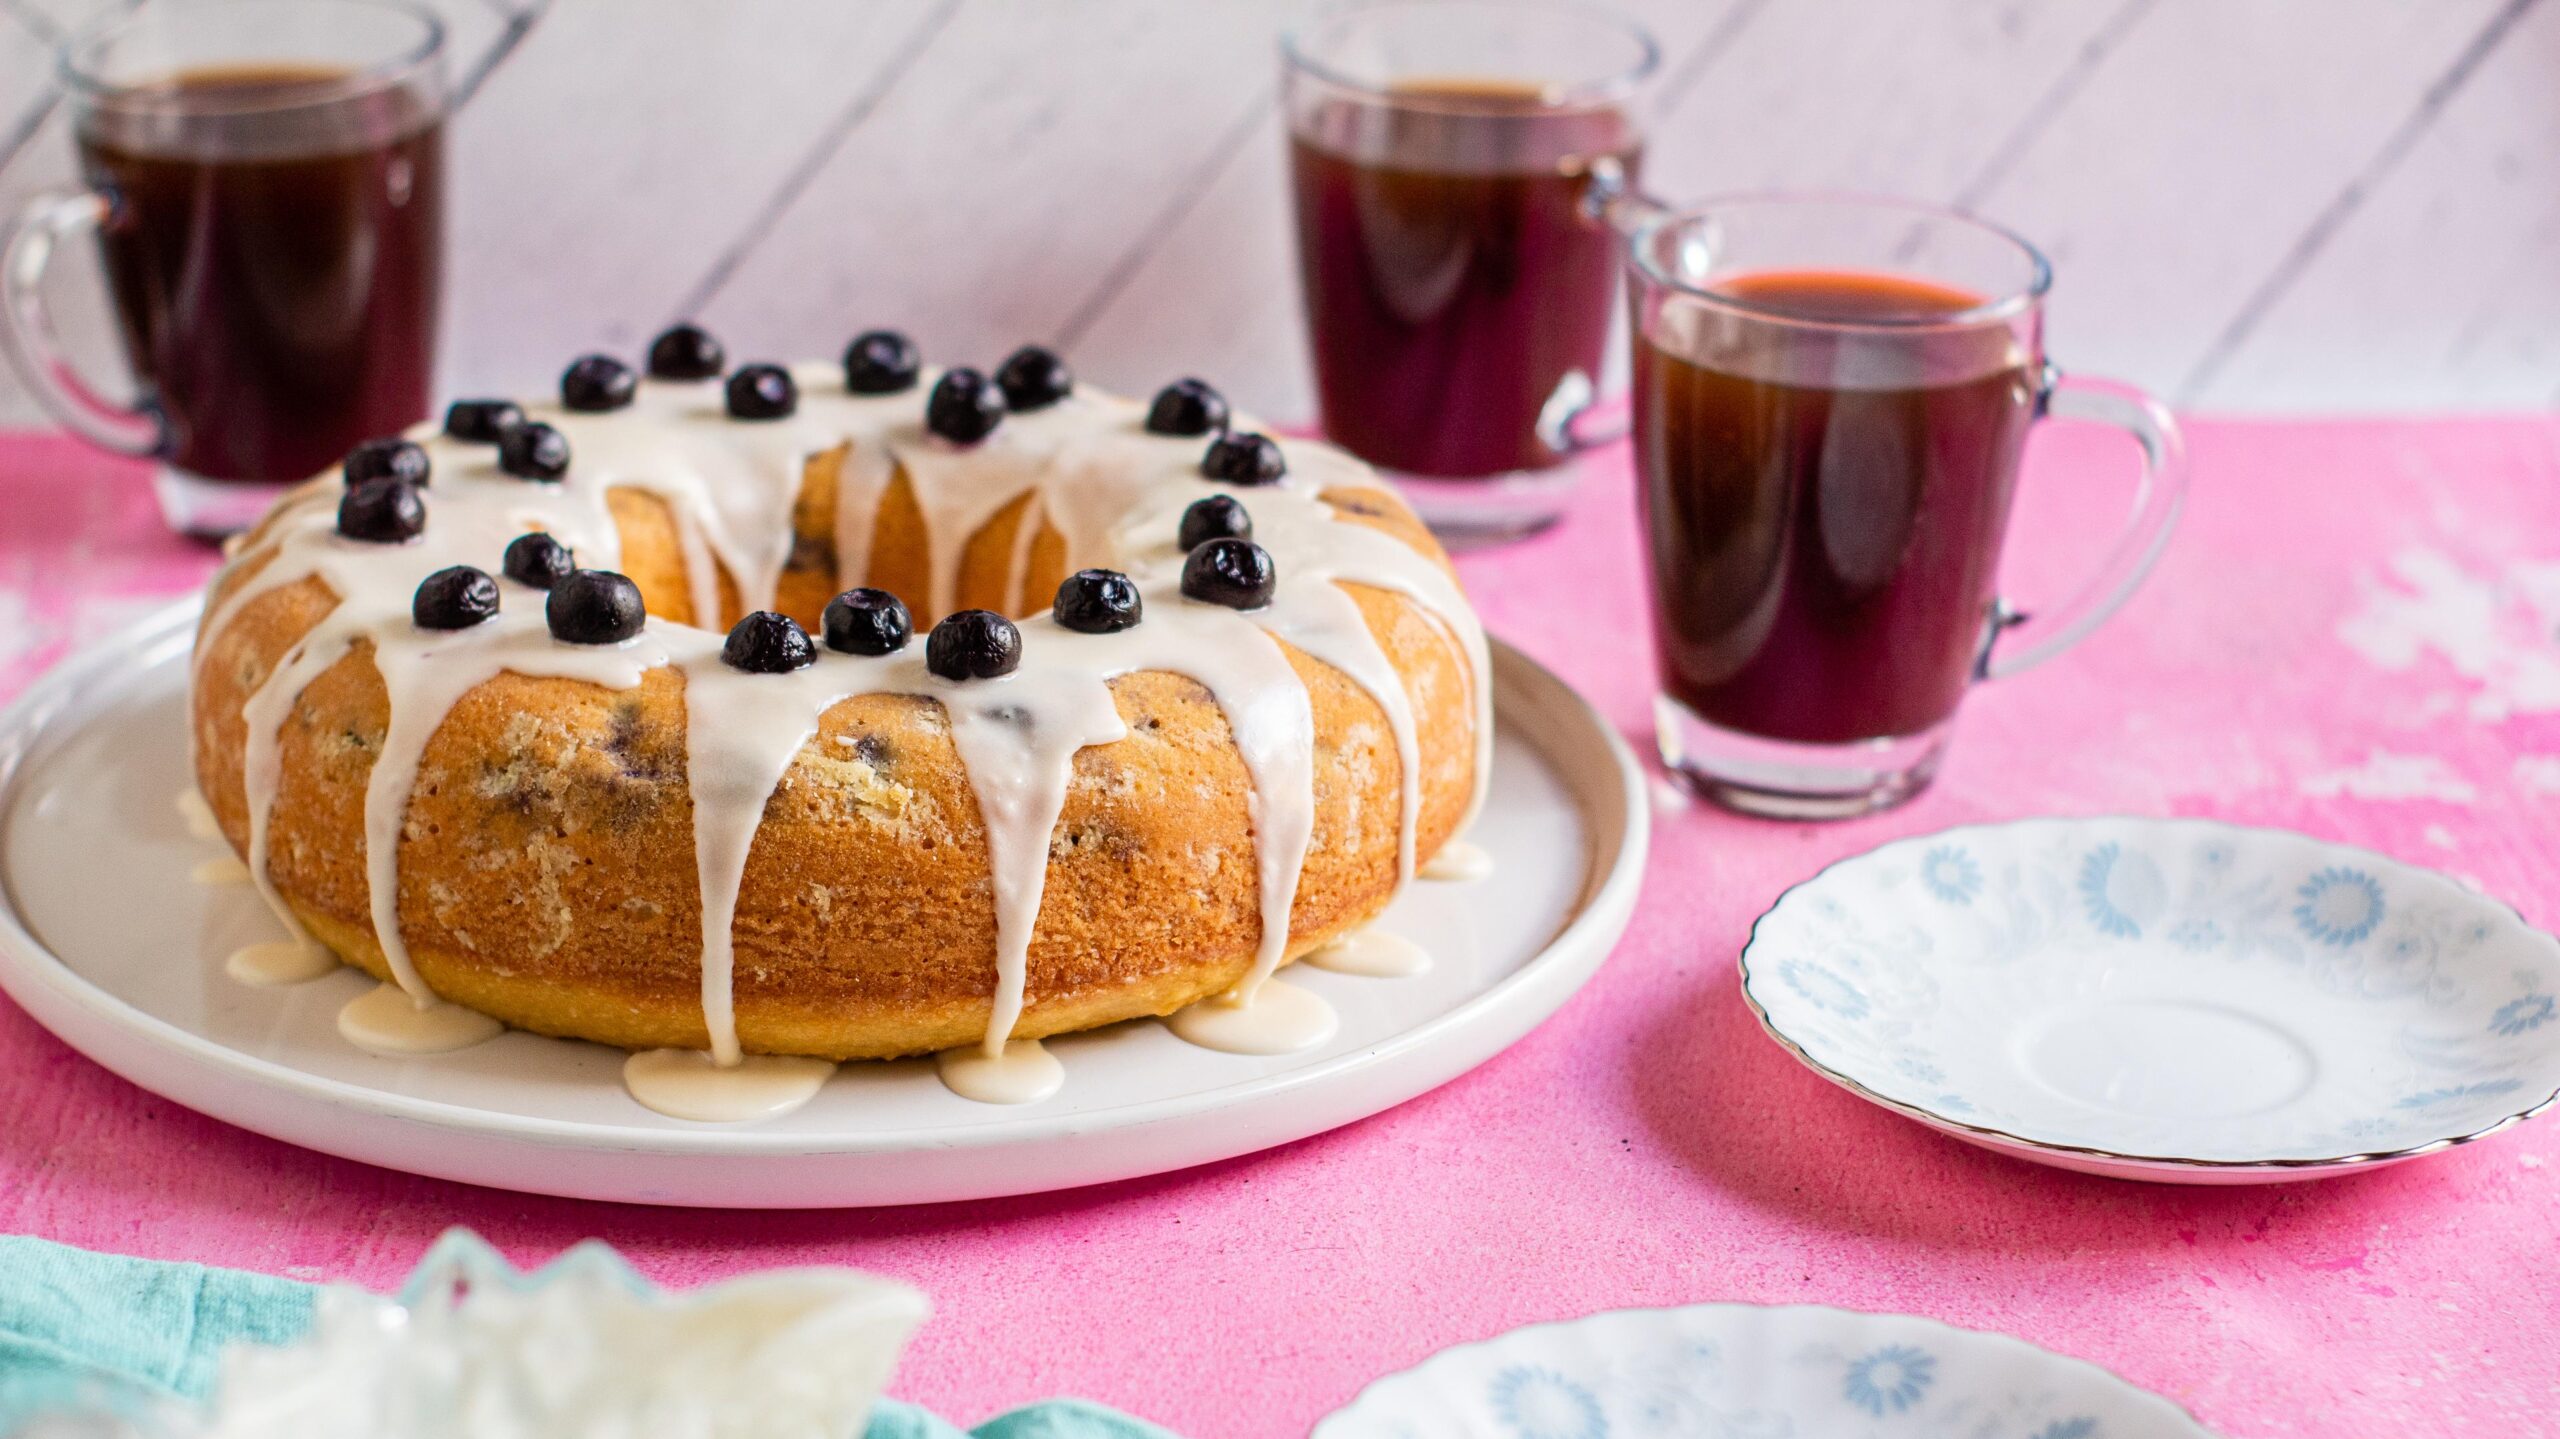  The perfect make-ahead treat for family brunches!